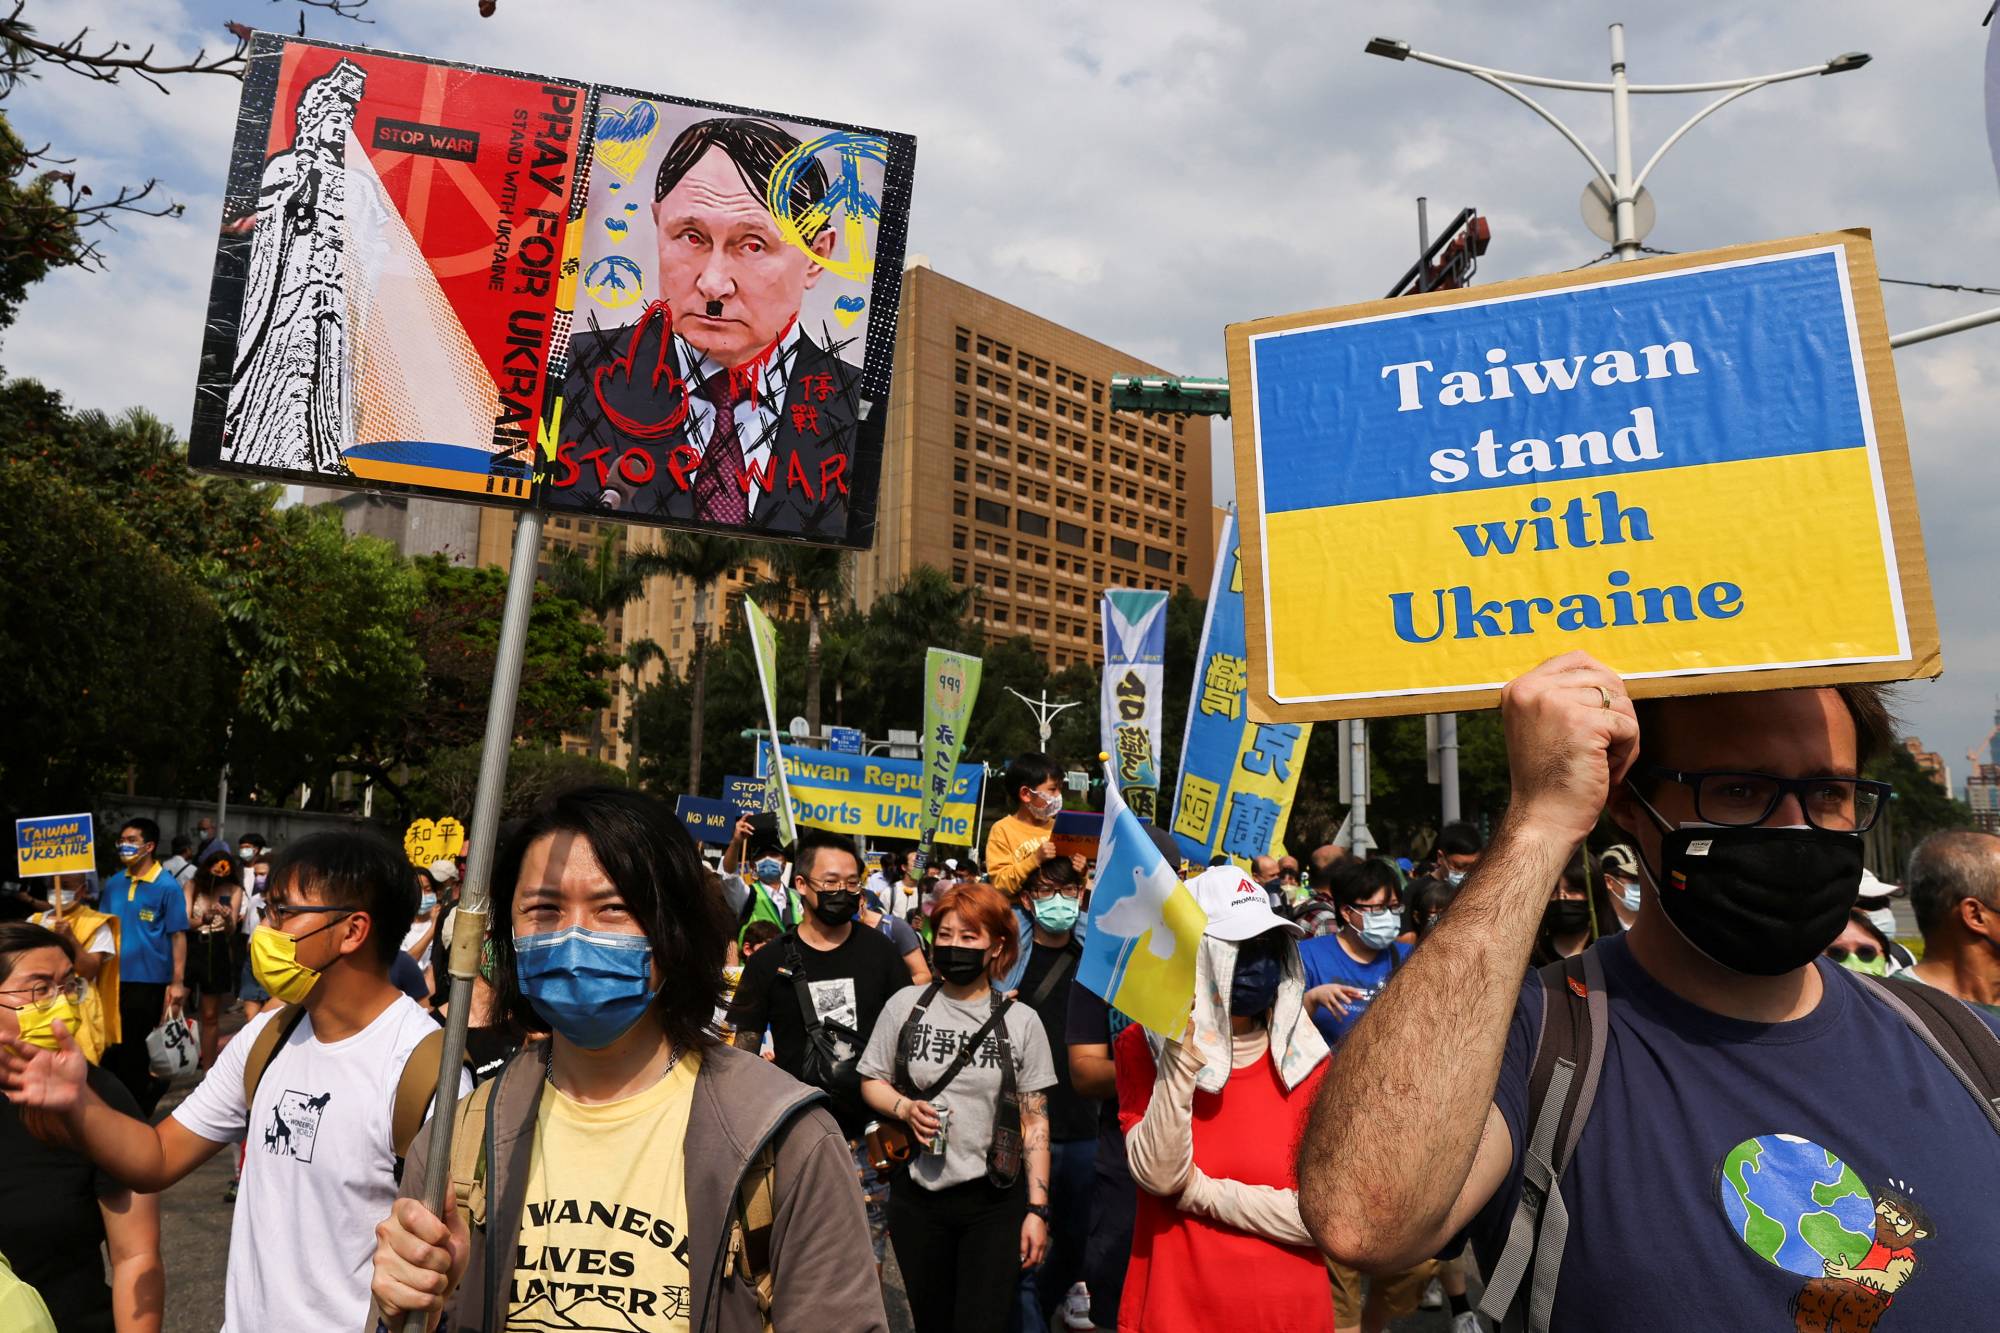 Ukraine war gives Taiwan pointers for its own defense | The Japan Times